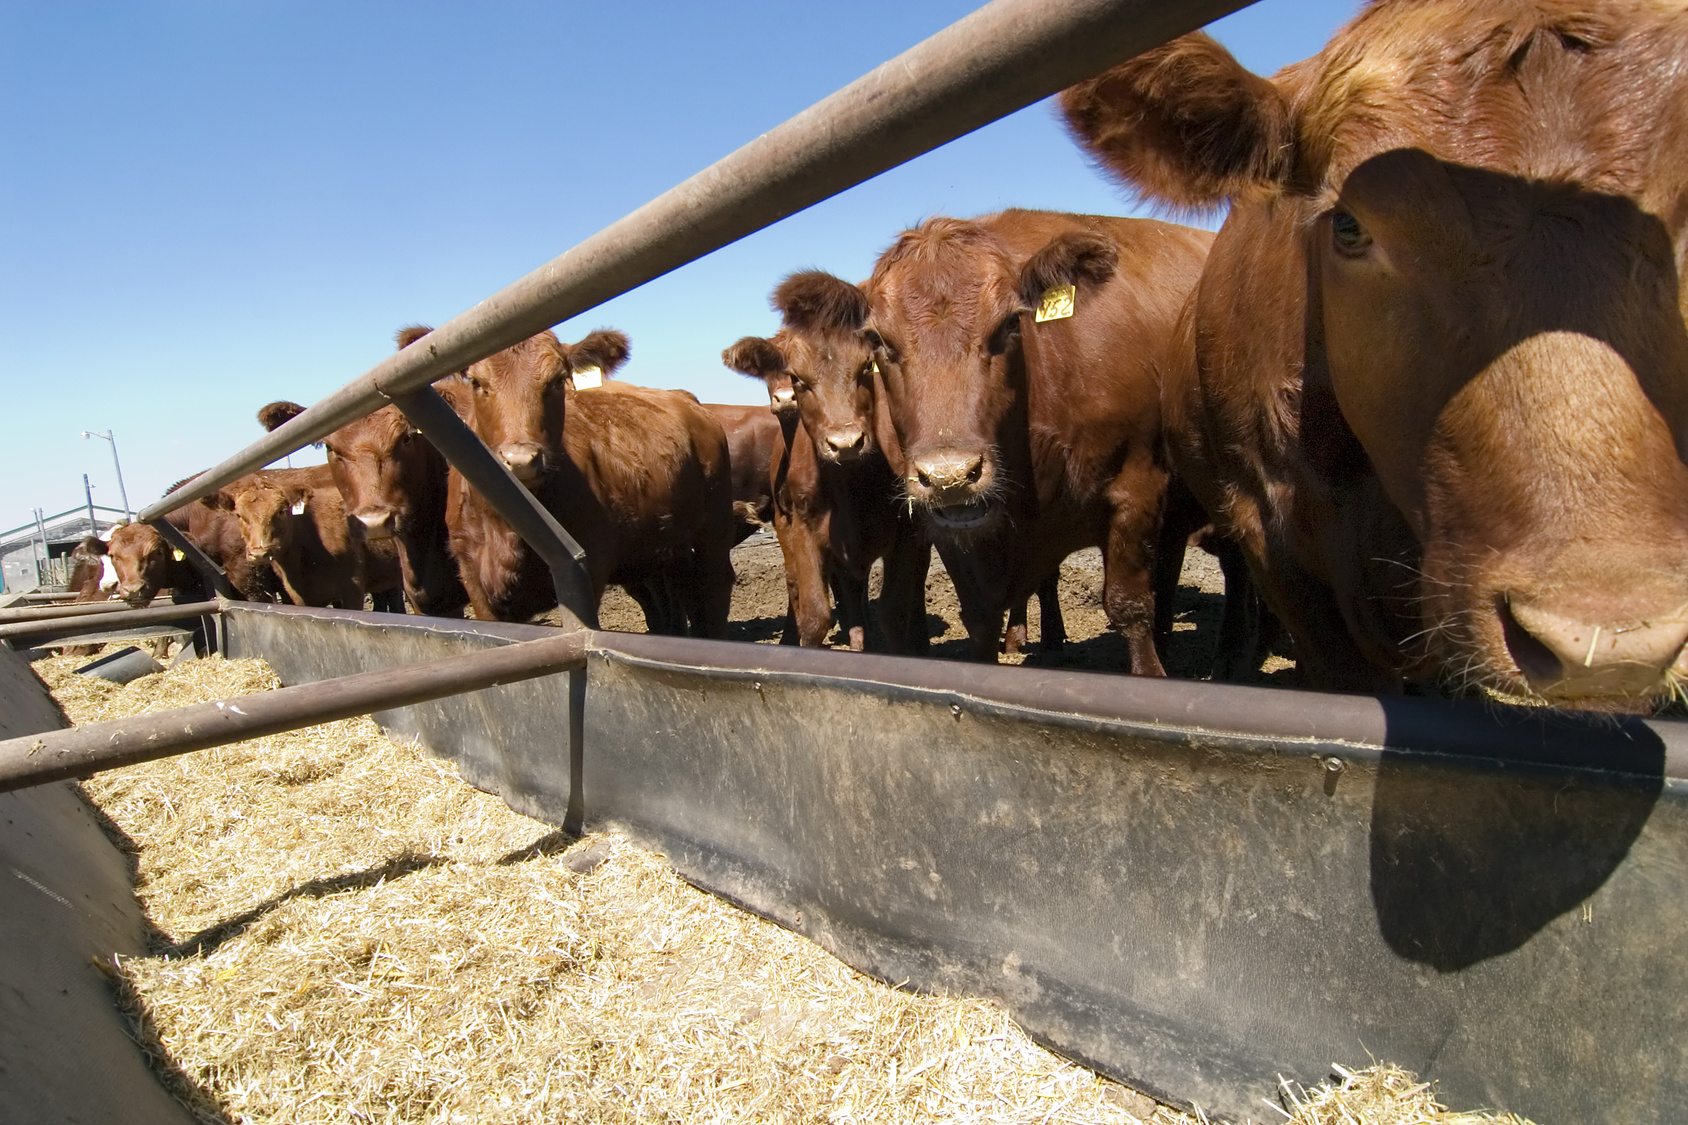 County welcomes public to Livestock Emergency Response Plan info sessions